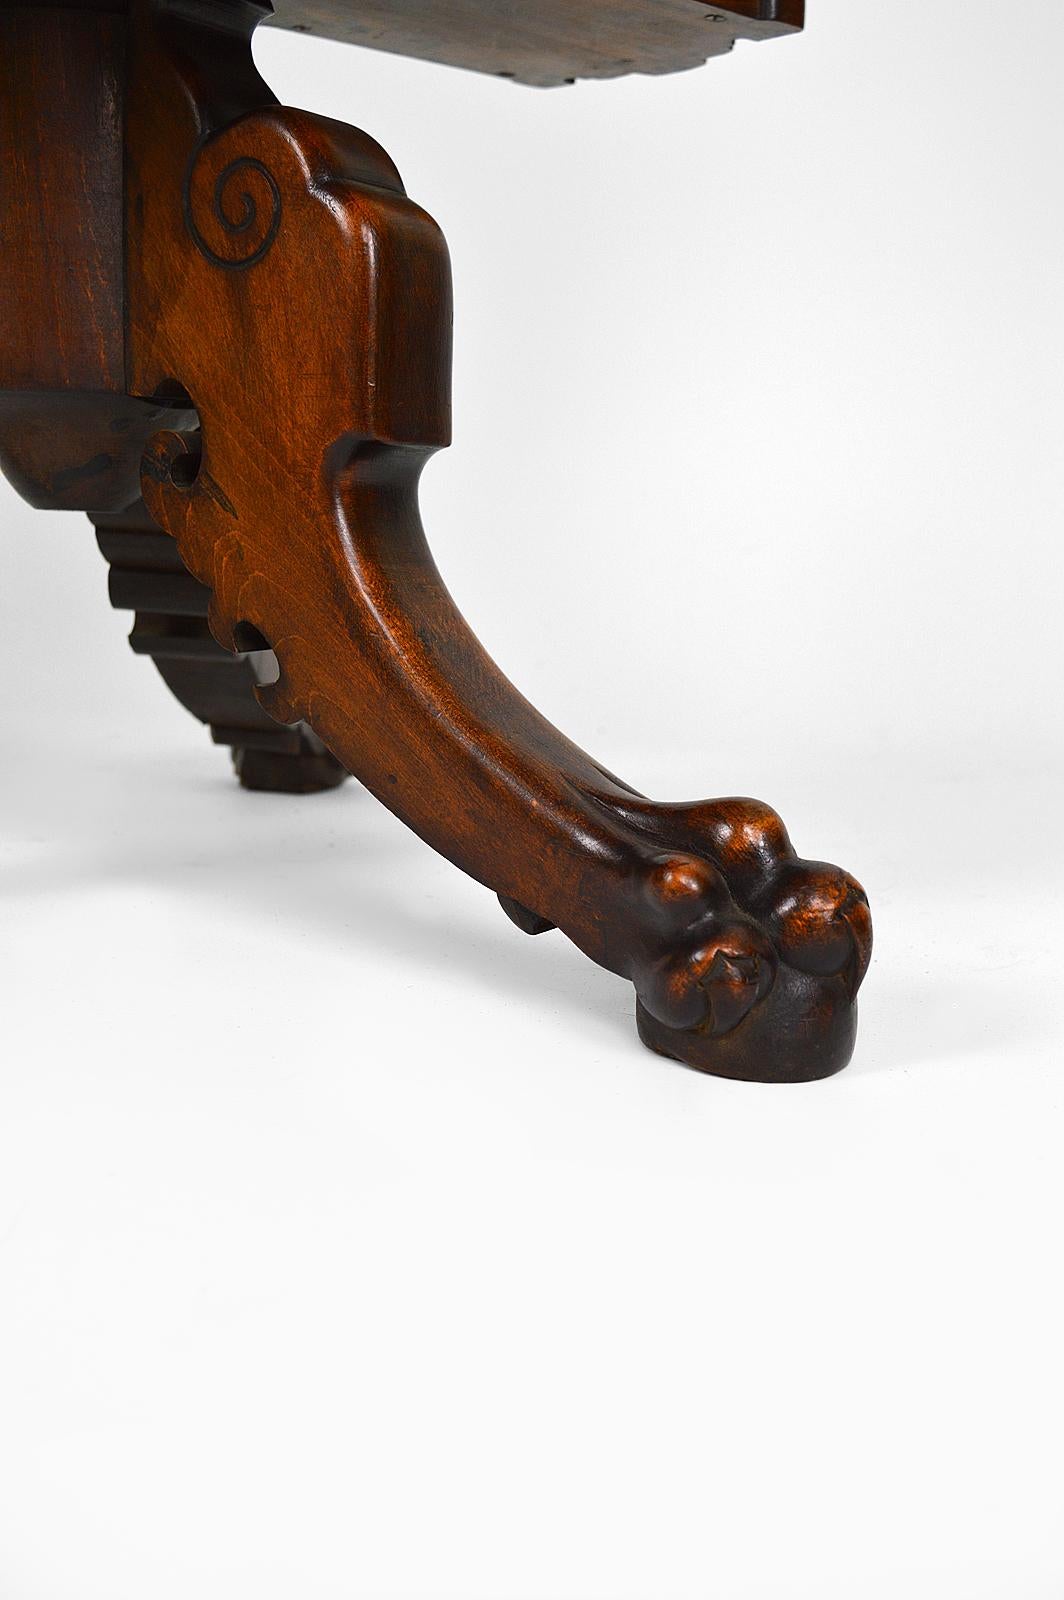 Swivel Bookcase Table with Carved Top by Gabriel Viardot, Japonism, circa 1880 For Sale 7